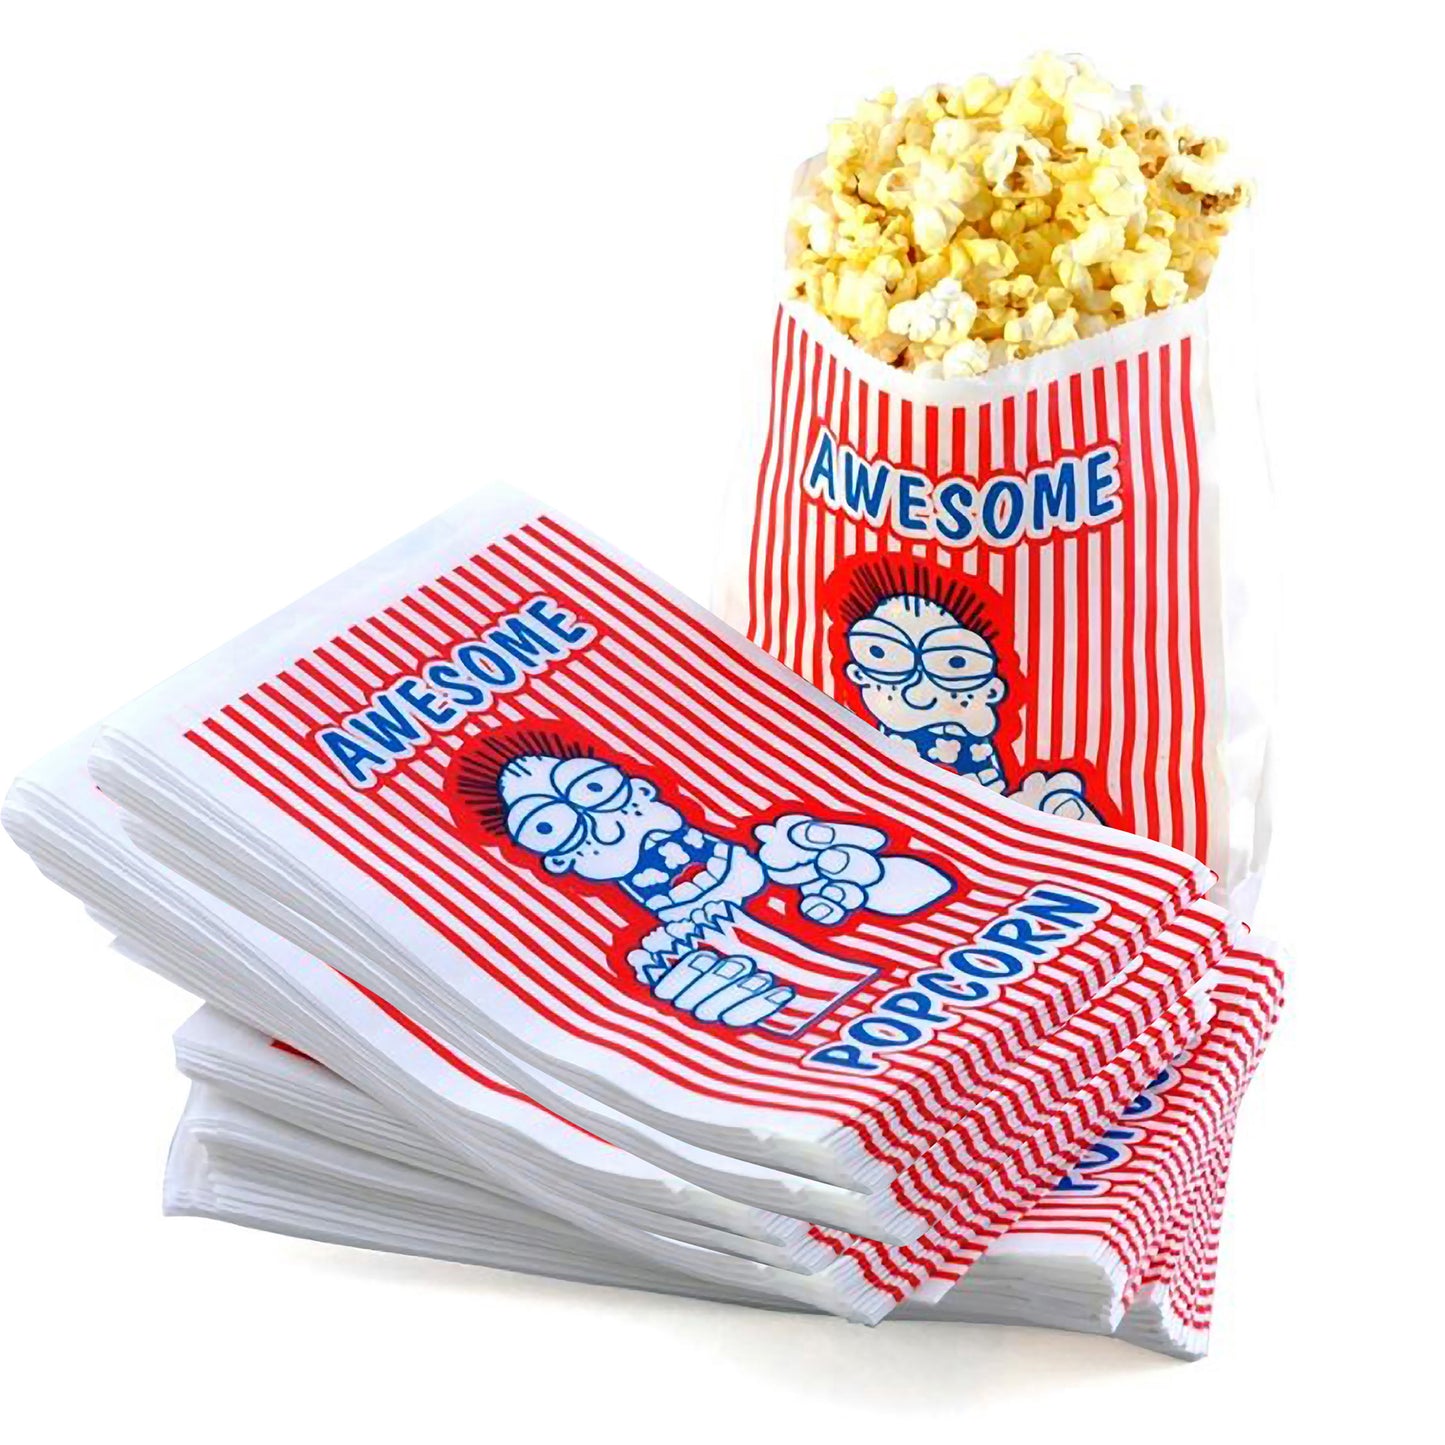 100 Popcorn Bags and 12 Ounce All-in-One Popcorn Packs  – Case of 24